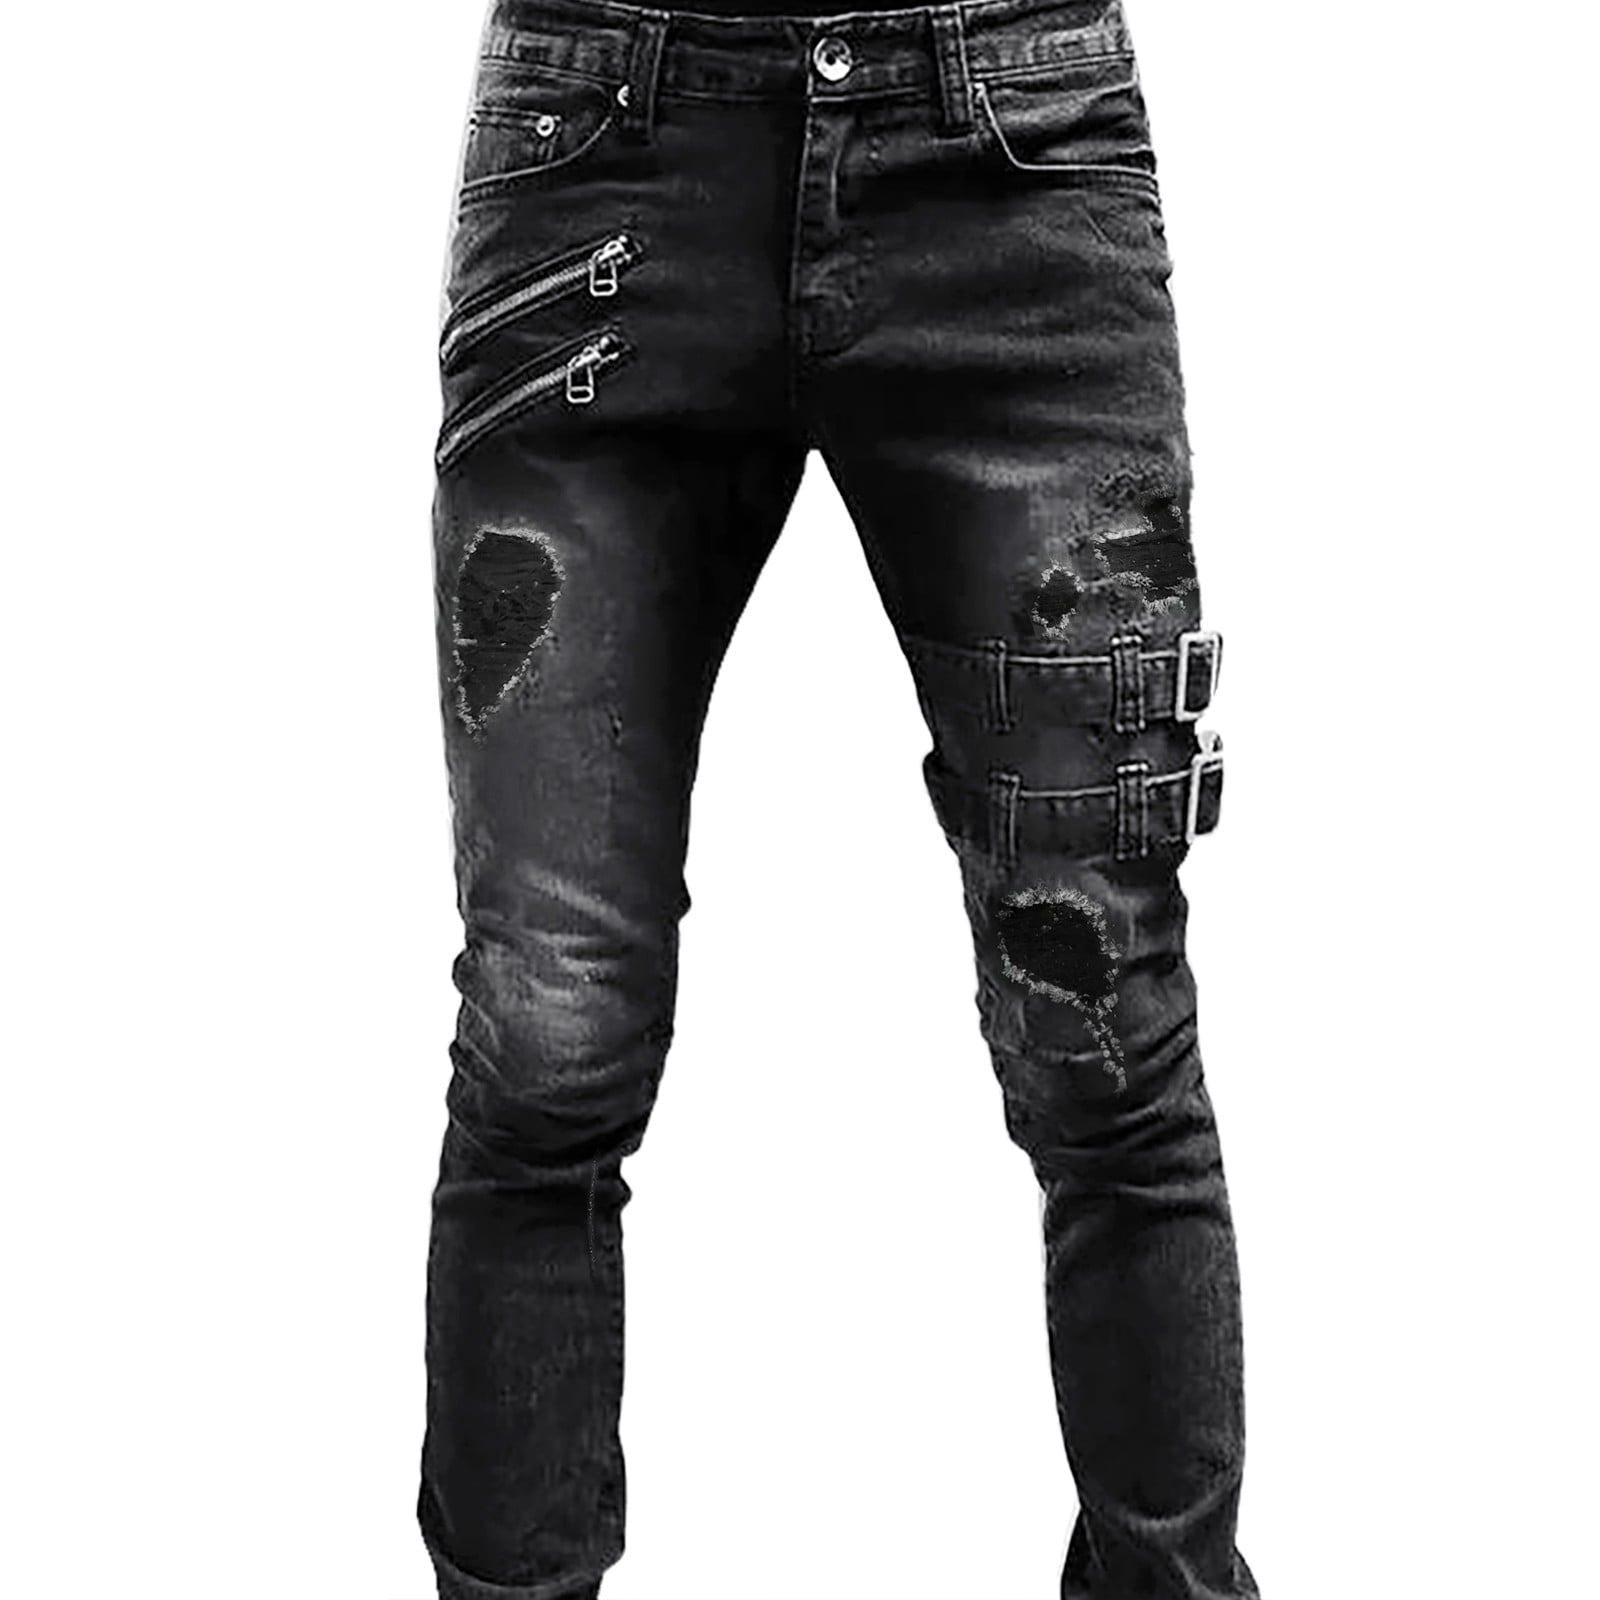 Shiusina Men's Trousers Casual Straight Mid-rise Slim Fit Ripped Jeans - Walmart.com